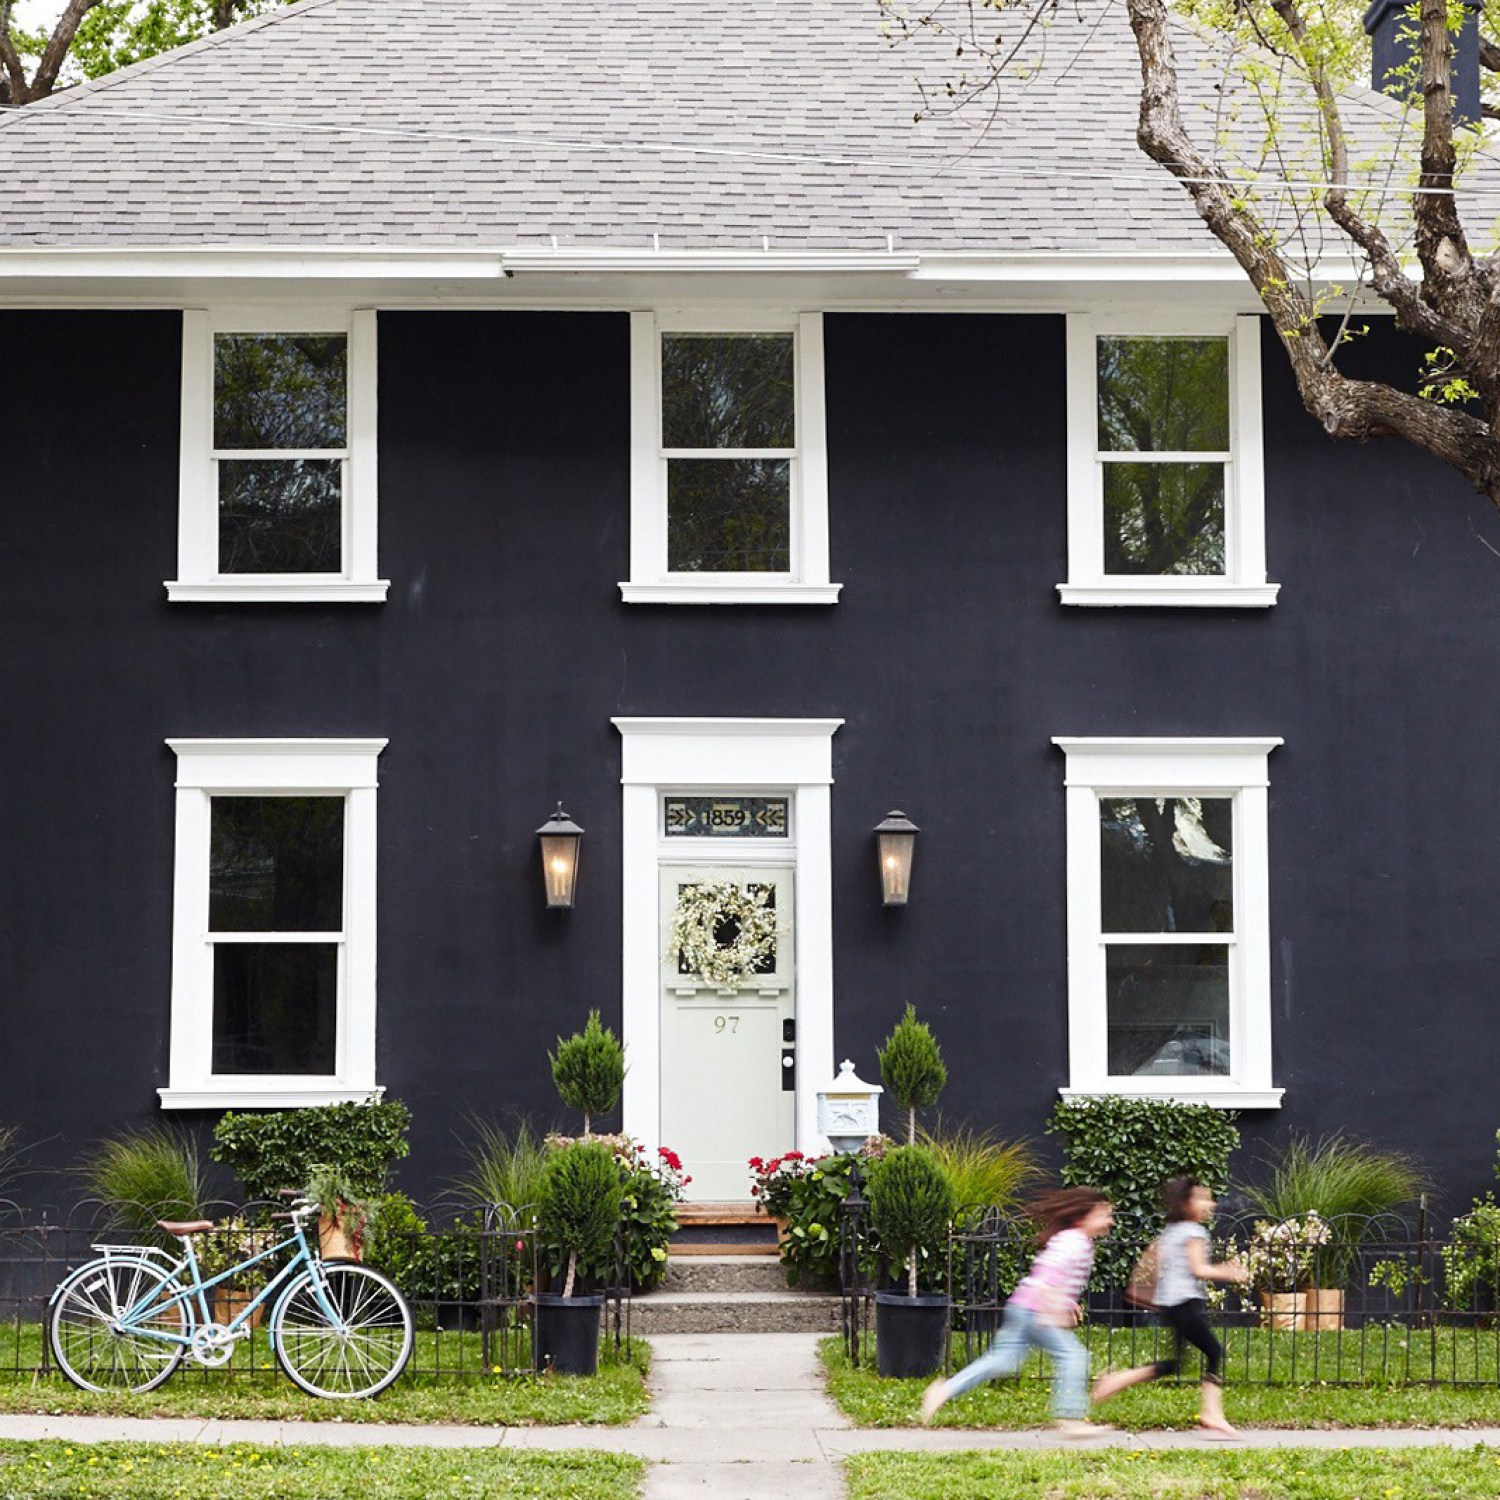 Home with dark painted exterior